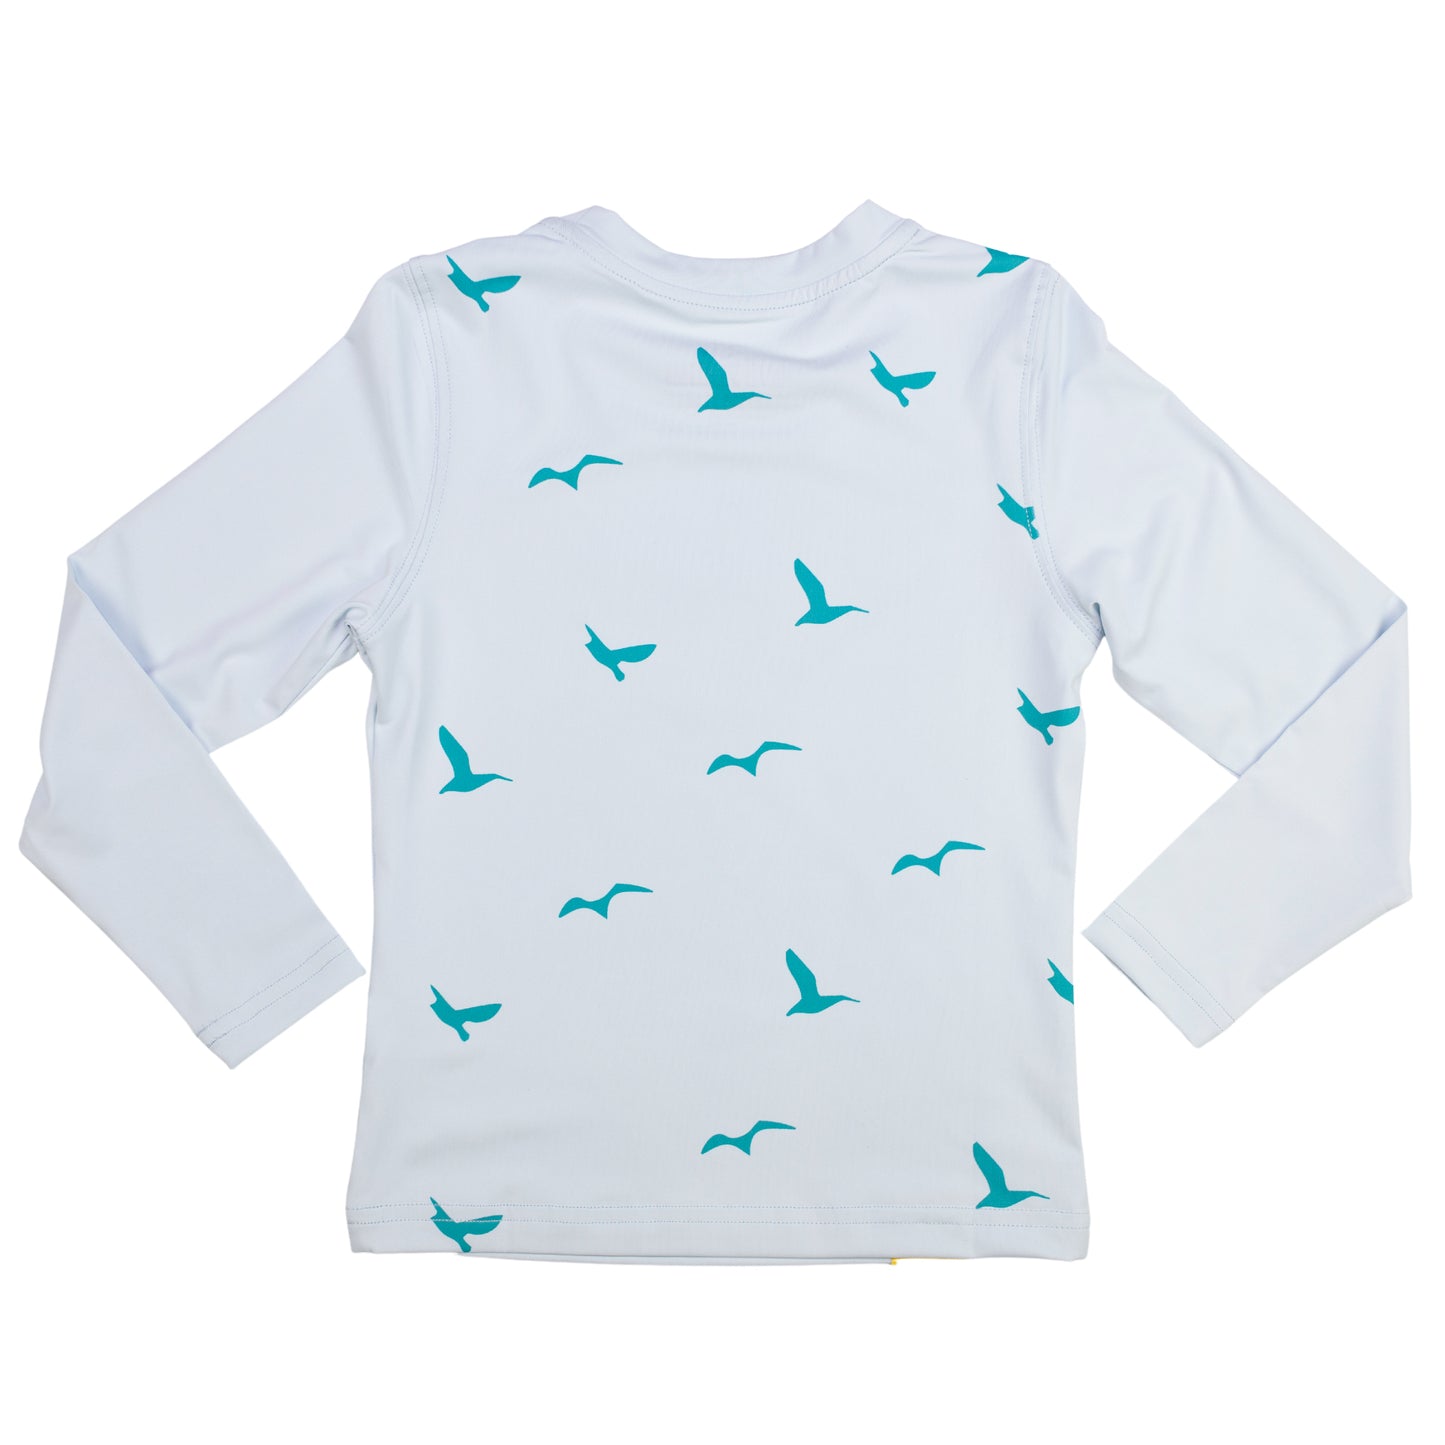 Live Wildly Toddler UPF 50+ Performance Shirt - Spring Blue - Live Wildly 